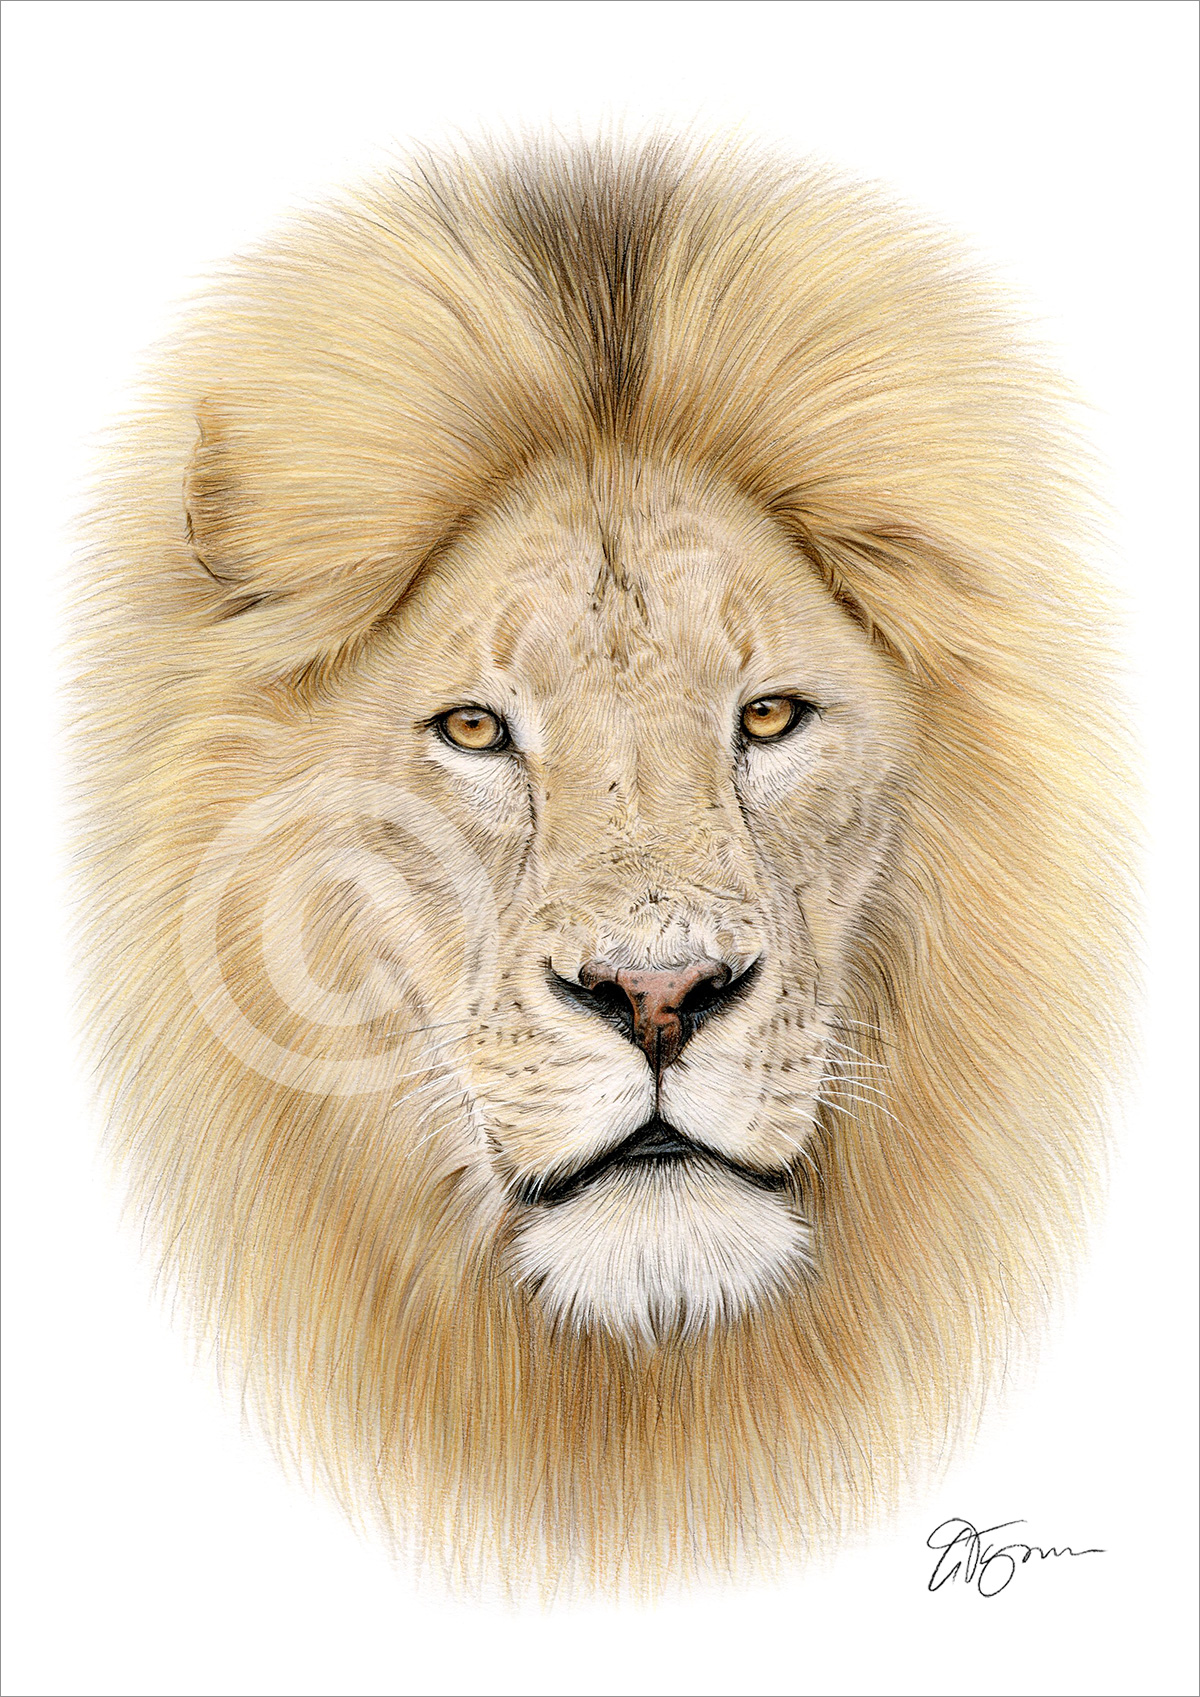 Colour pencil drawing of a lion in portrait by artist Gary Tymon